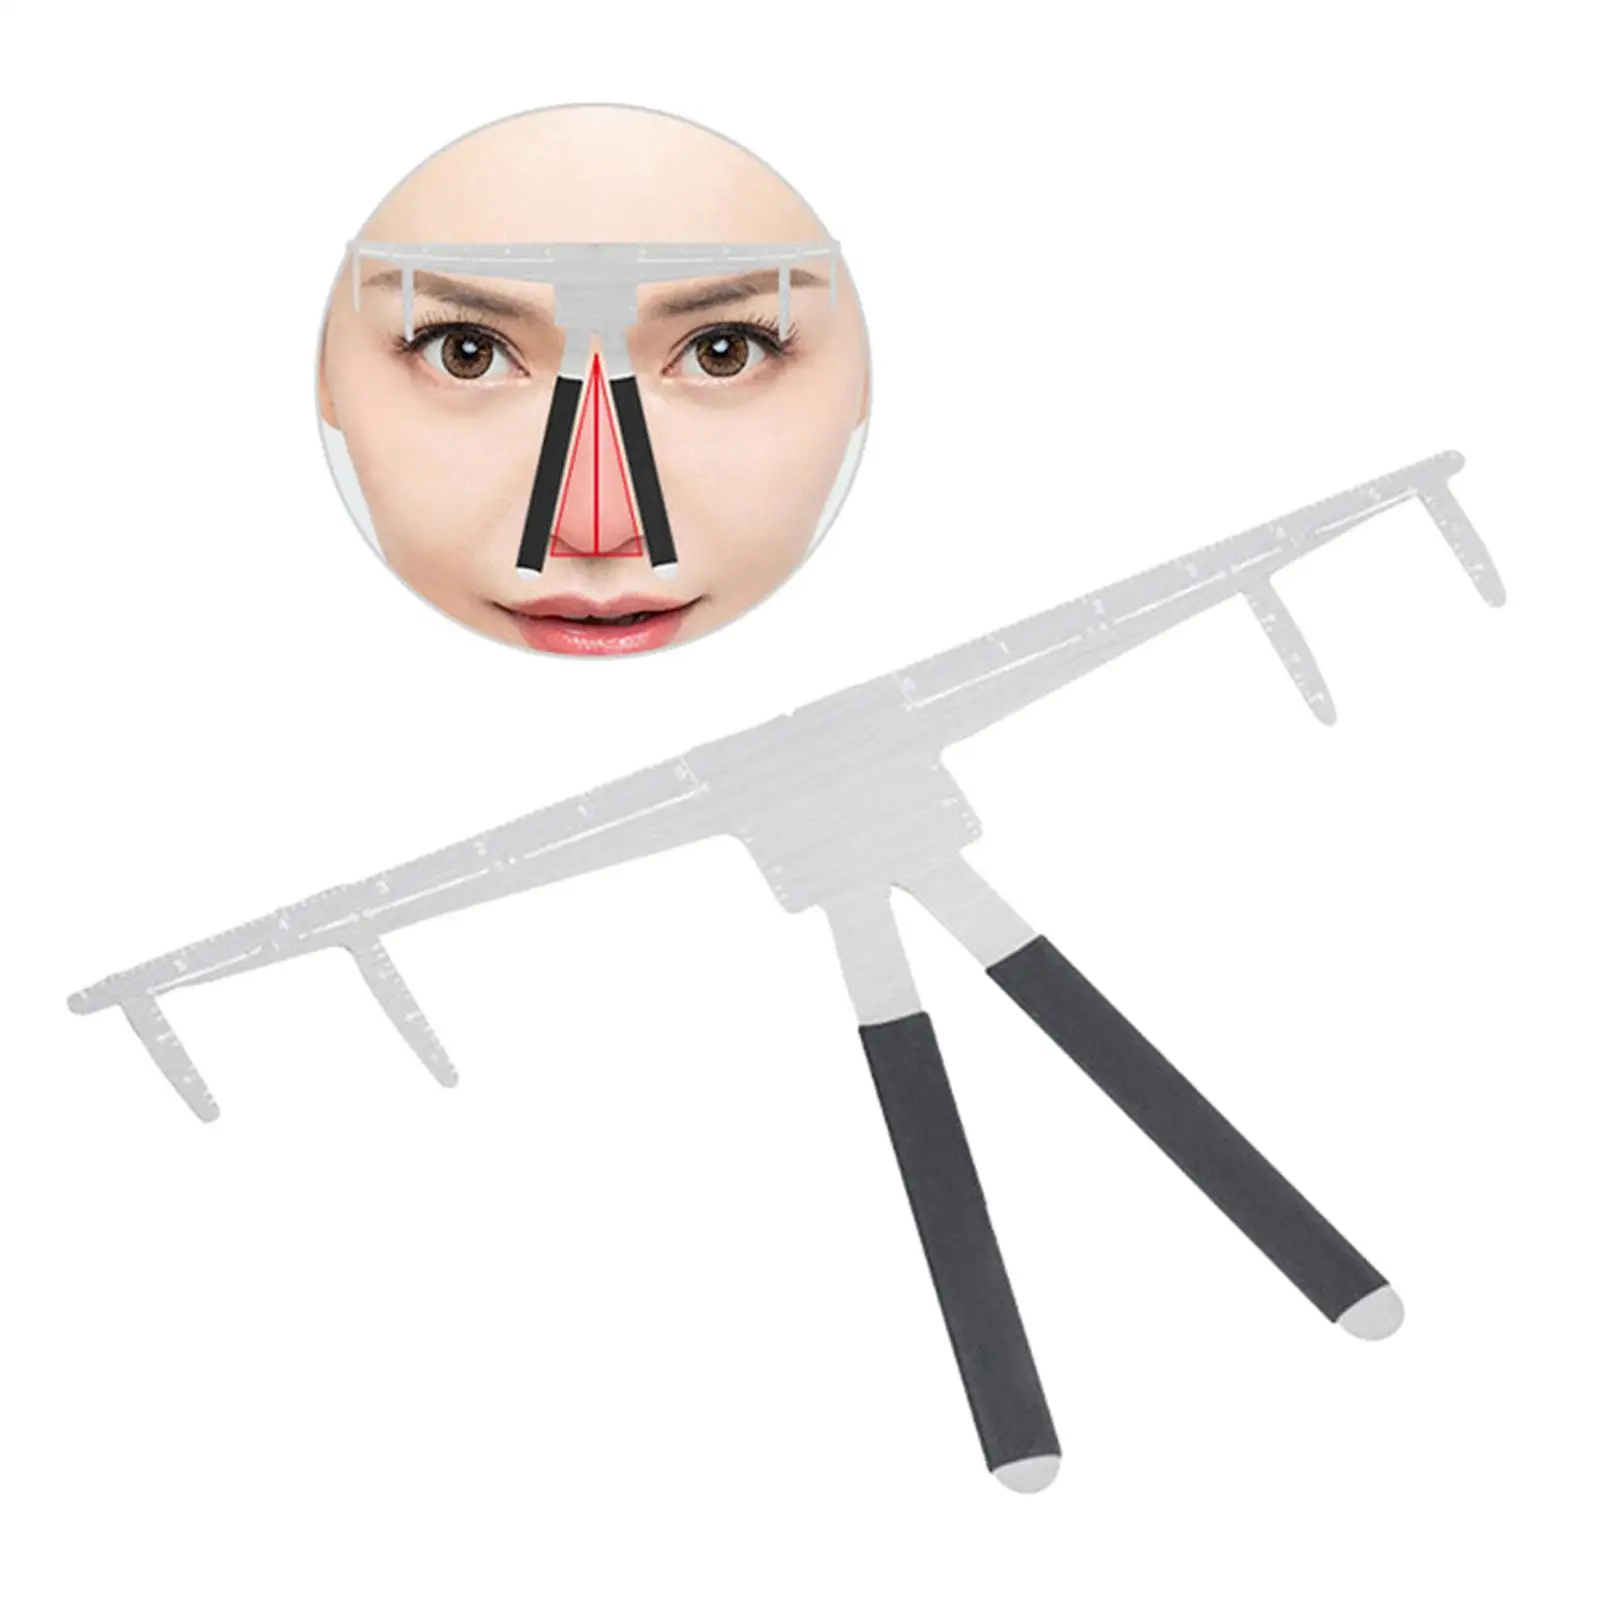  Eyebrow Ruler Balance Ruler Tool Grooming Stencil Shaper Permanent Tool for Eyebrow Measuring Positioning Shaping